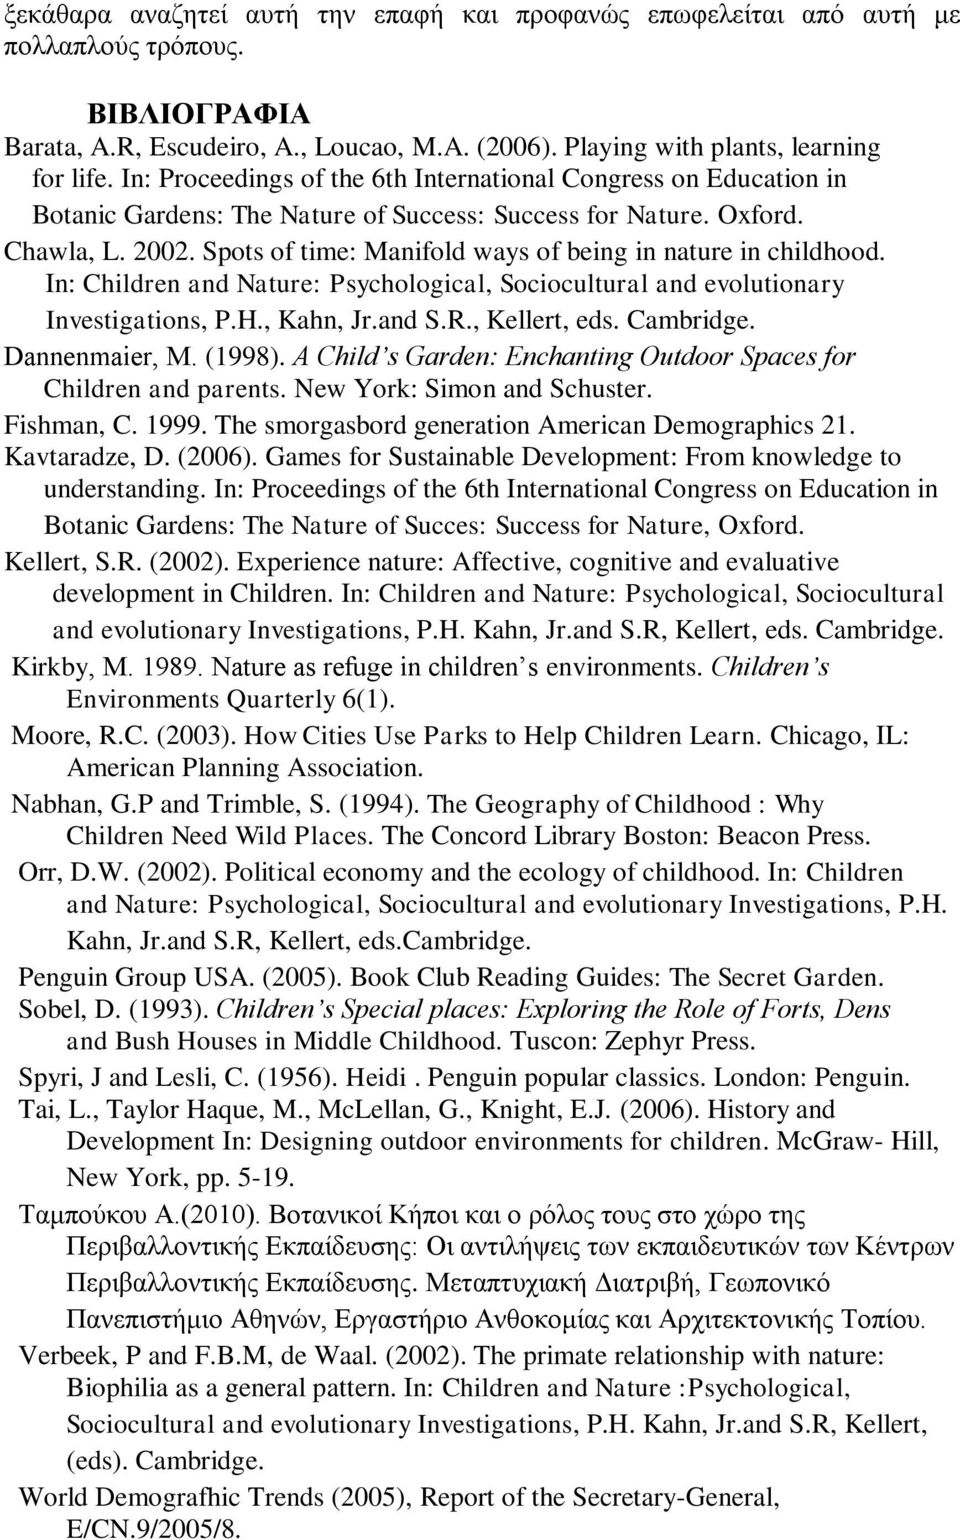 Spots of time: Manifold ways of being in nature in childhood. In: Children and Nature: Psychological, Sociocultural and evolutionary Investigations, P.H., Kahn, Jr.and S.R., Kellert, eds. Cambridge.